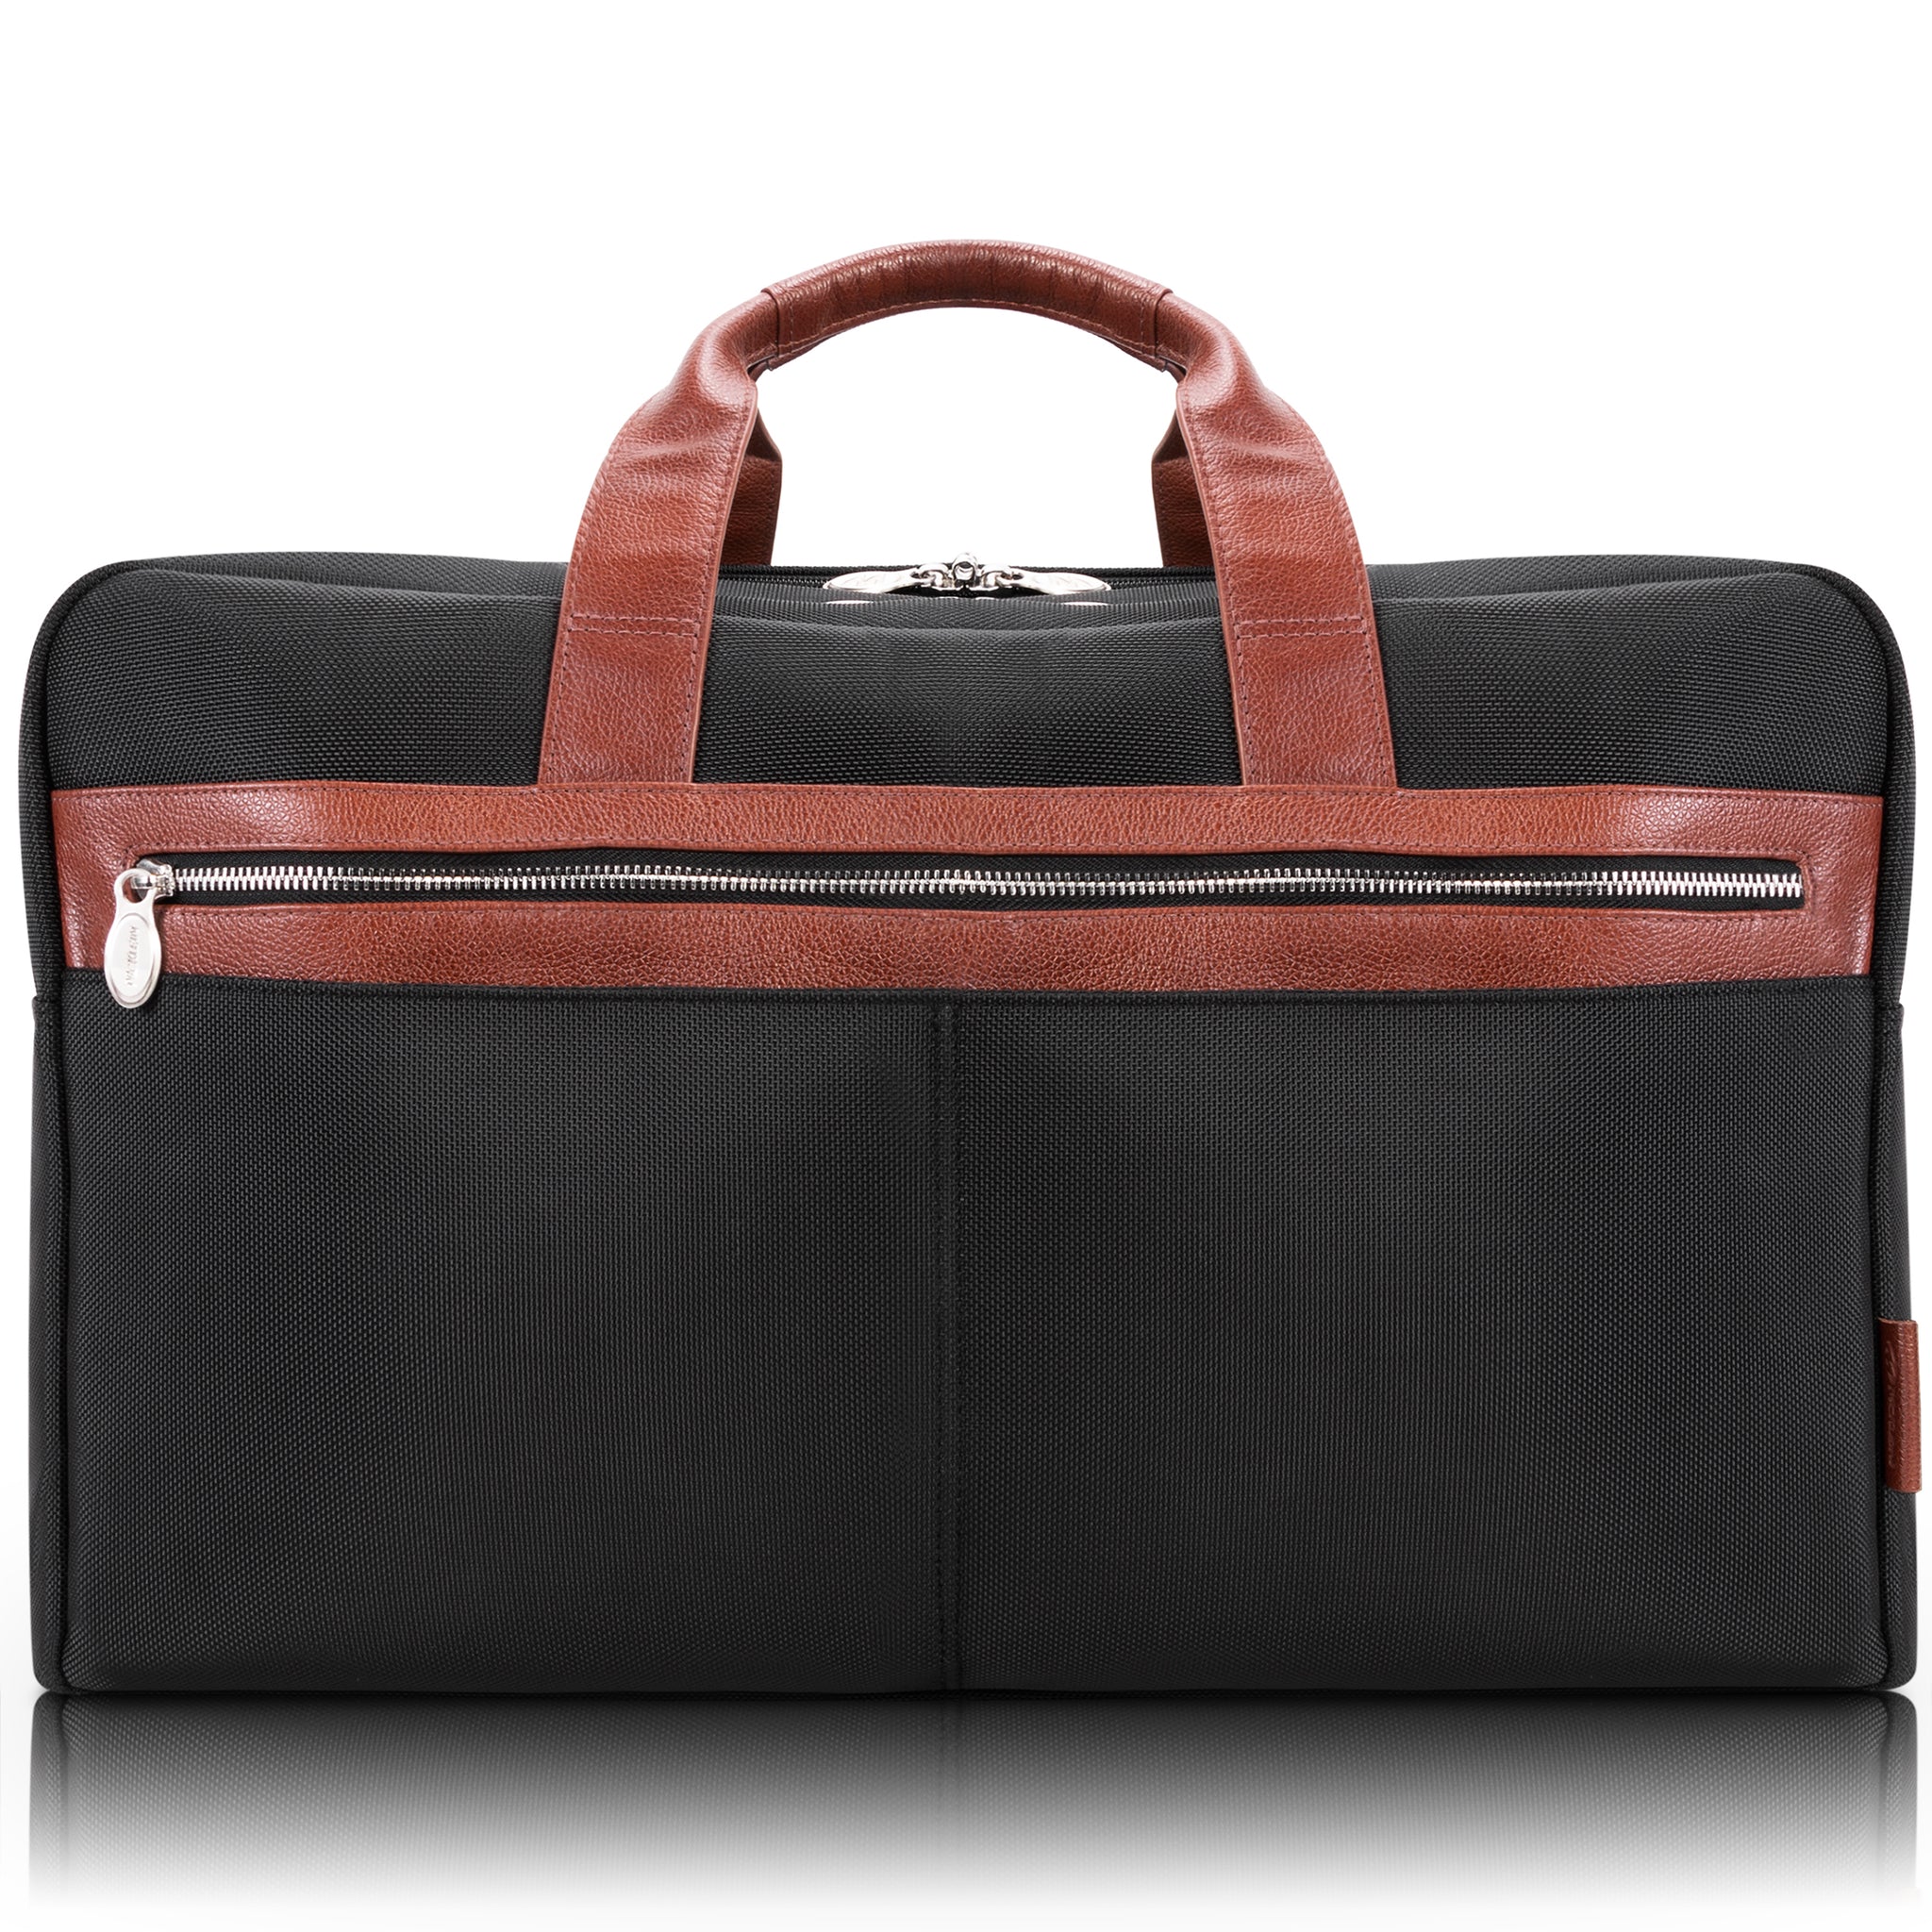 McKlein WELLINGTON 21" Nylon, Two-tone, Dual-Compartment, Laptop & Tablet Carry-All Duffel